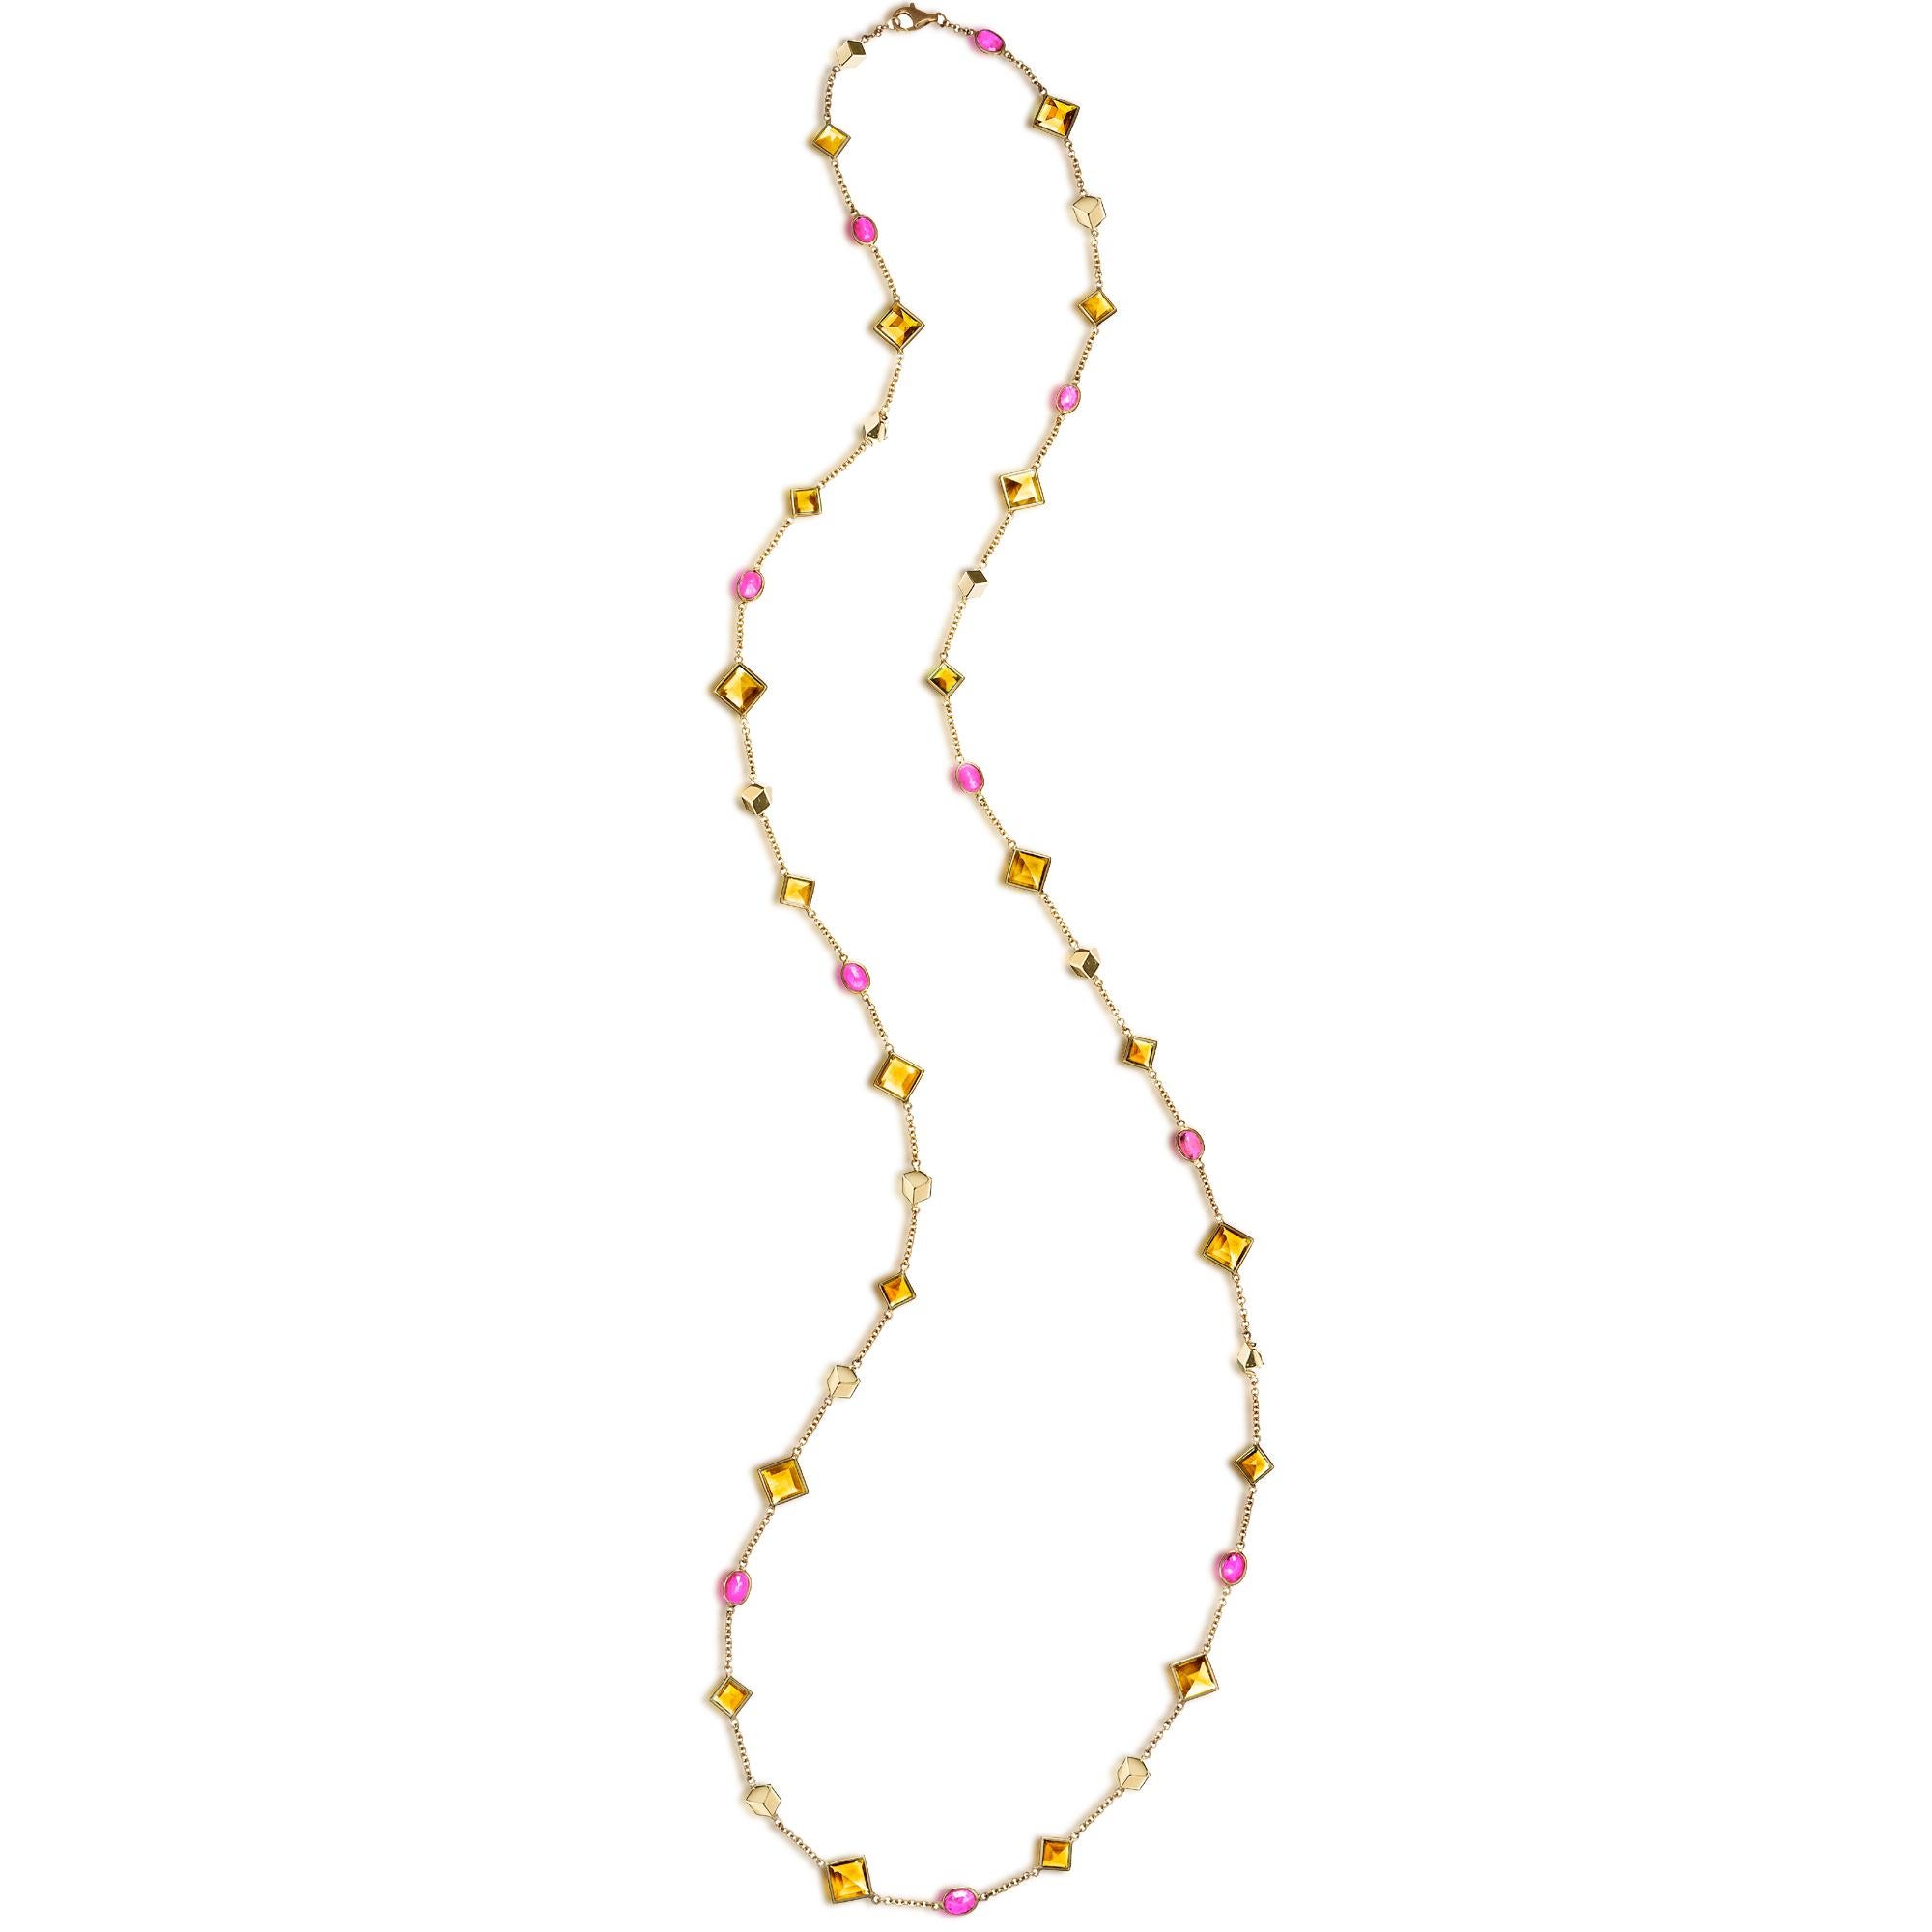 Paolo Costagli 18 Karat Yellow Gold Necklace with Citrine and Pink Sapphires im Angebot